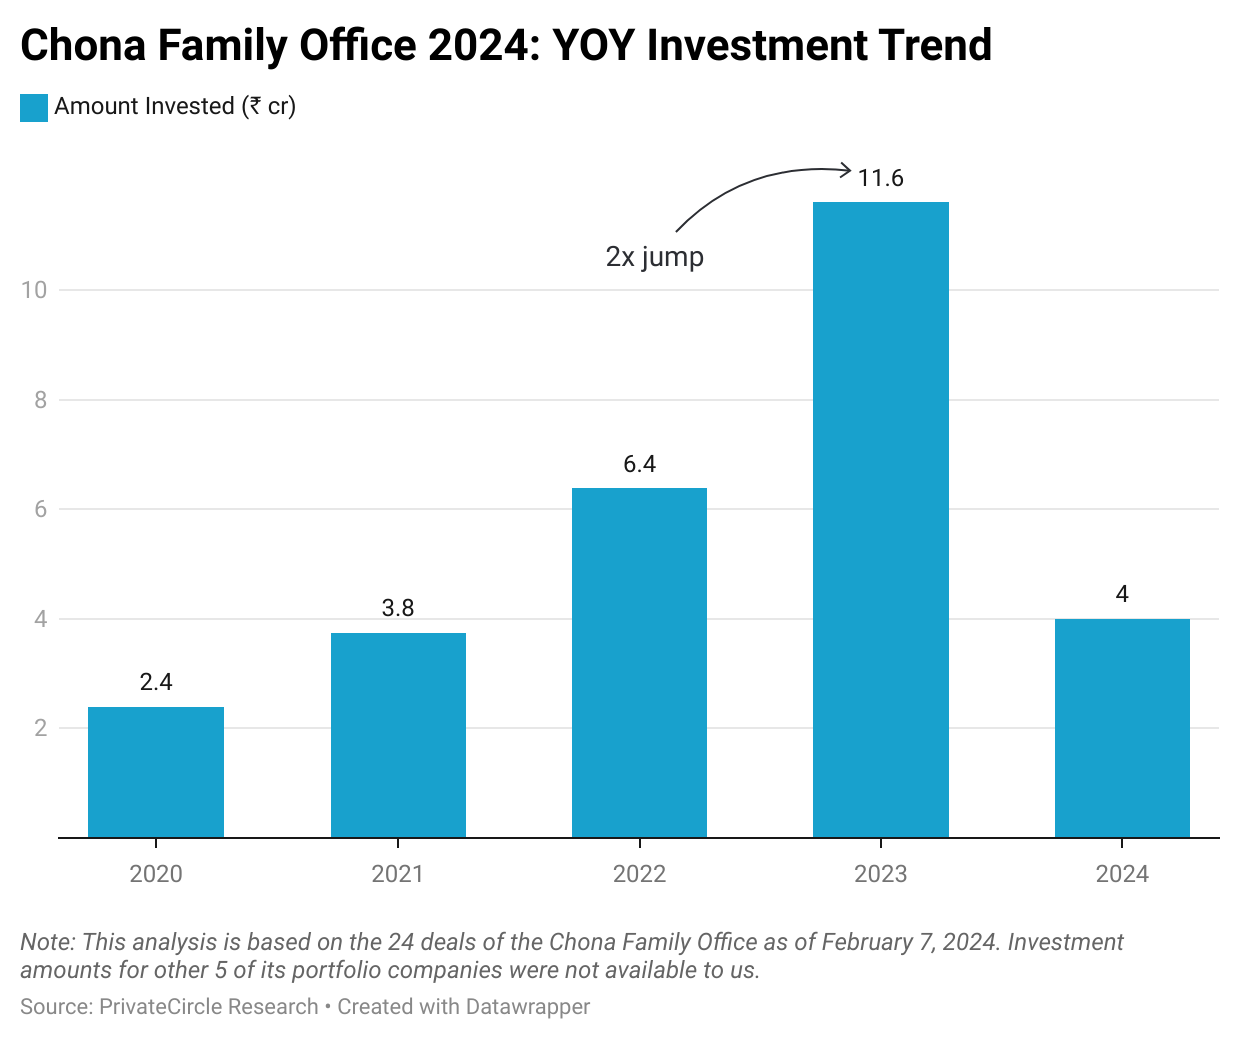 Chona Family Office 2024: YOY Investment Trend

Chona Family Office investment value almost doubled in 2023 as compared to 2022. It should be noted that 2023 was a tough year for startups with funding rounds slowing down globally.